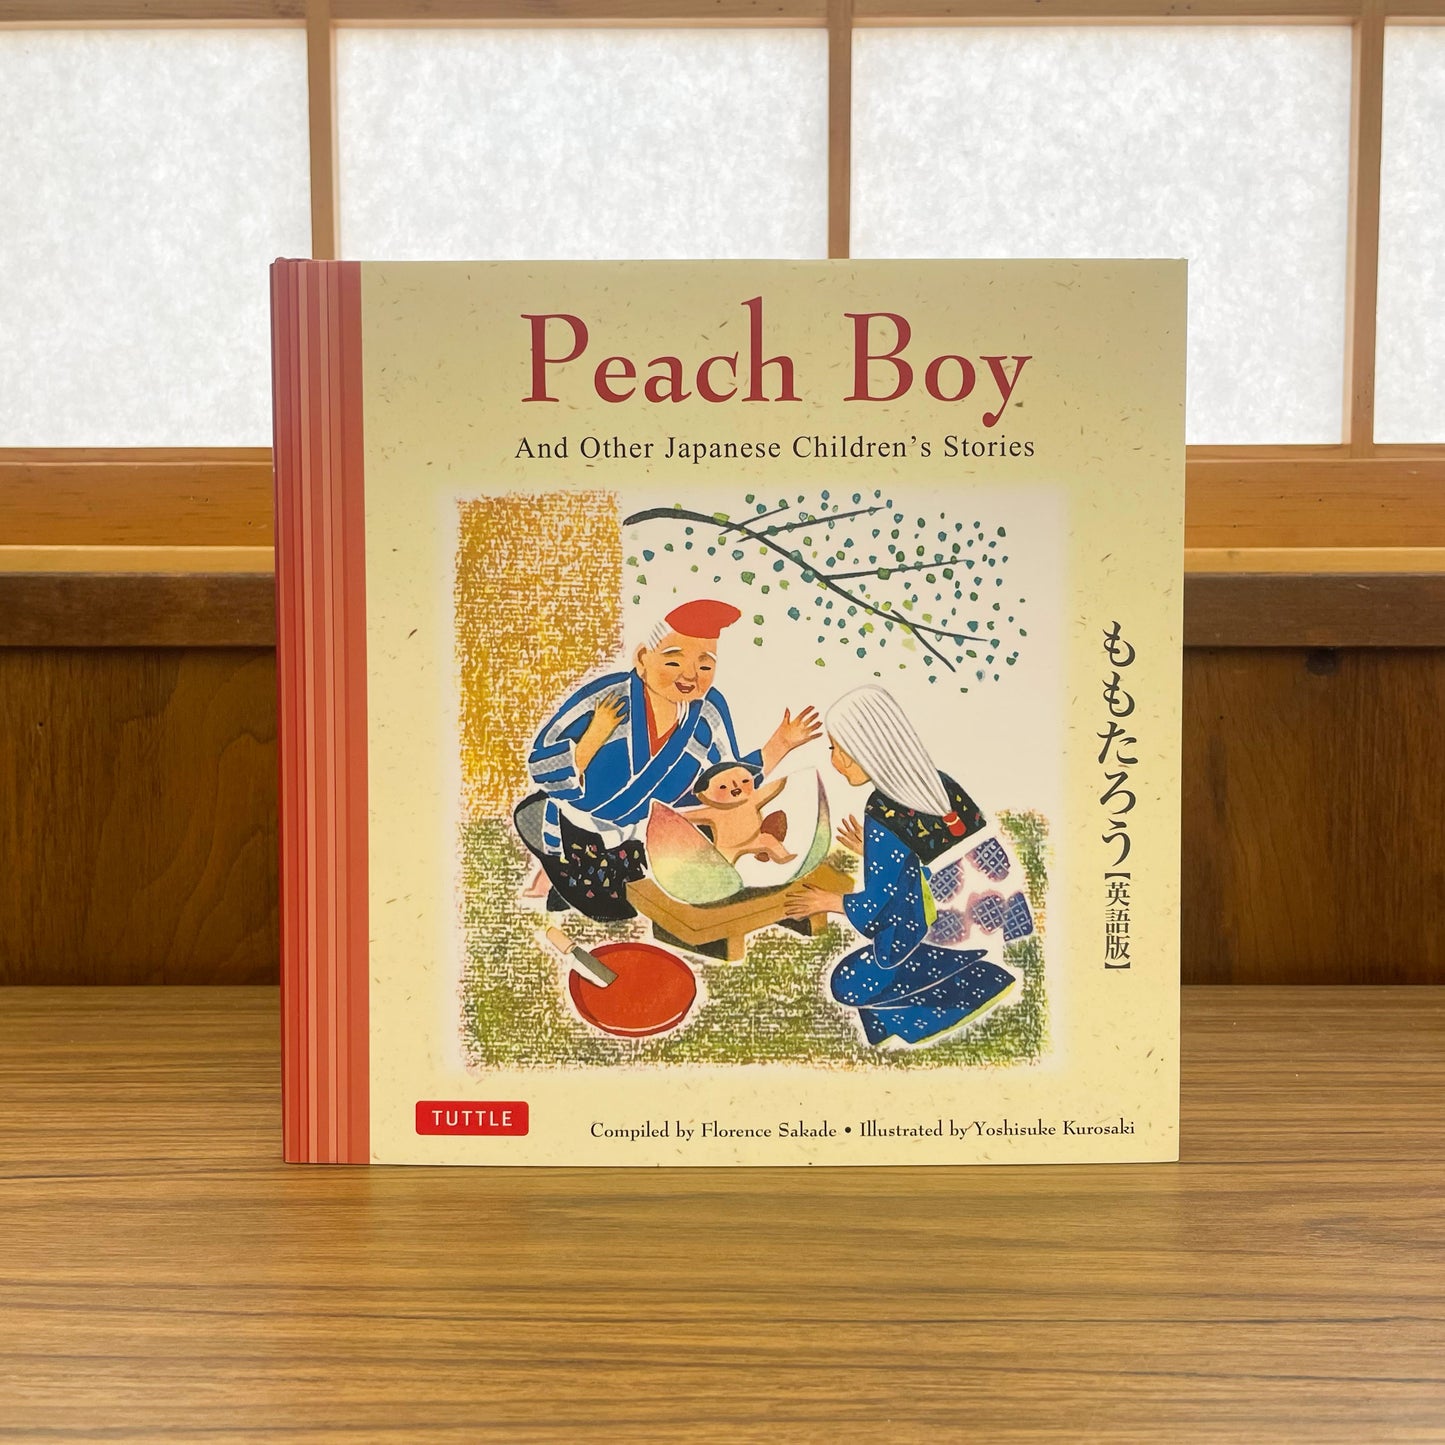 Peach Boy: And Other Japanese Children's Stories